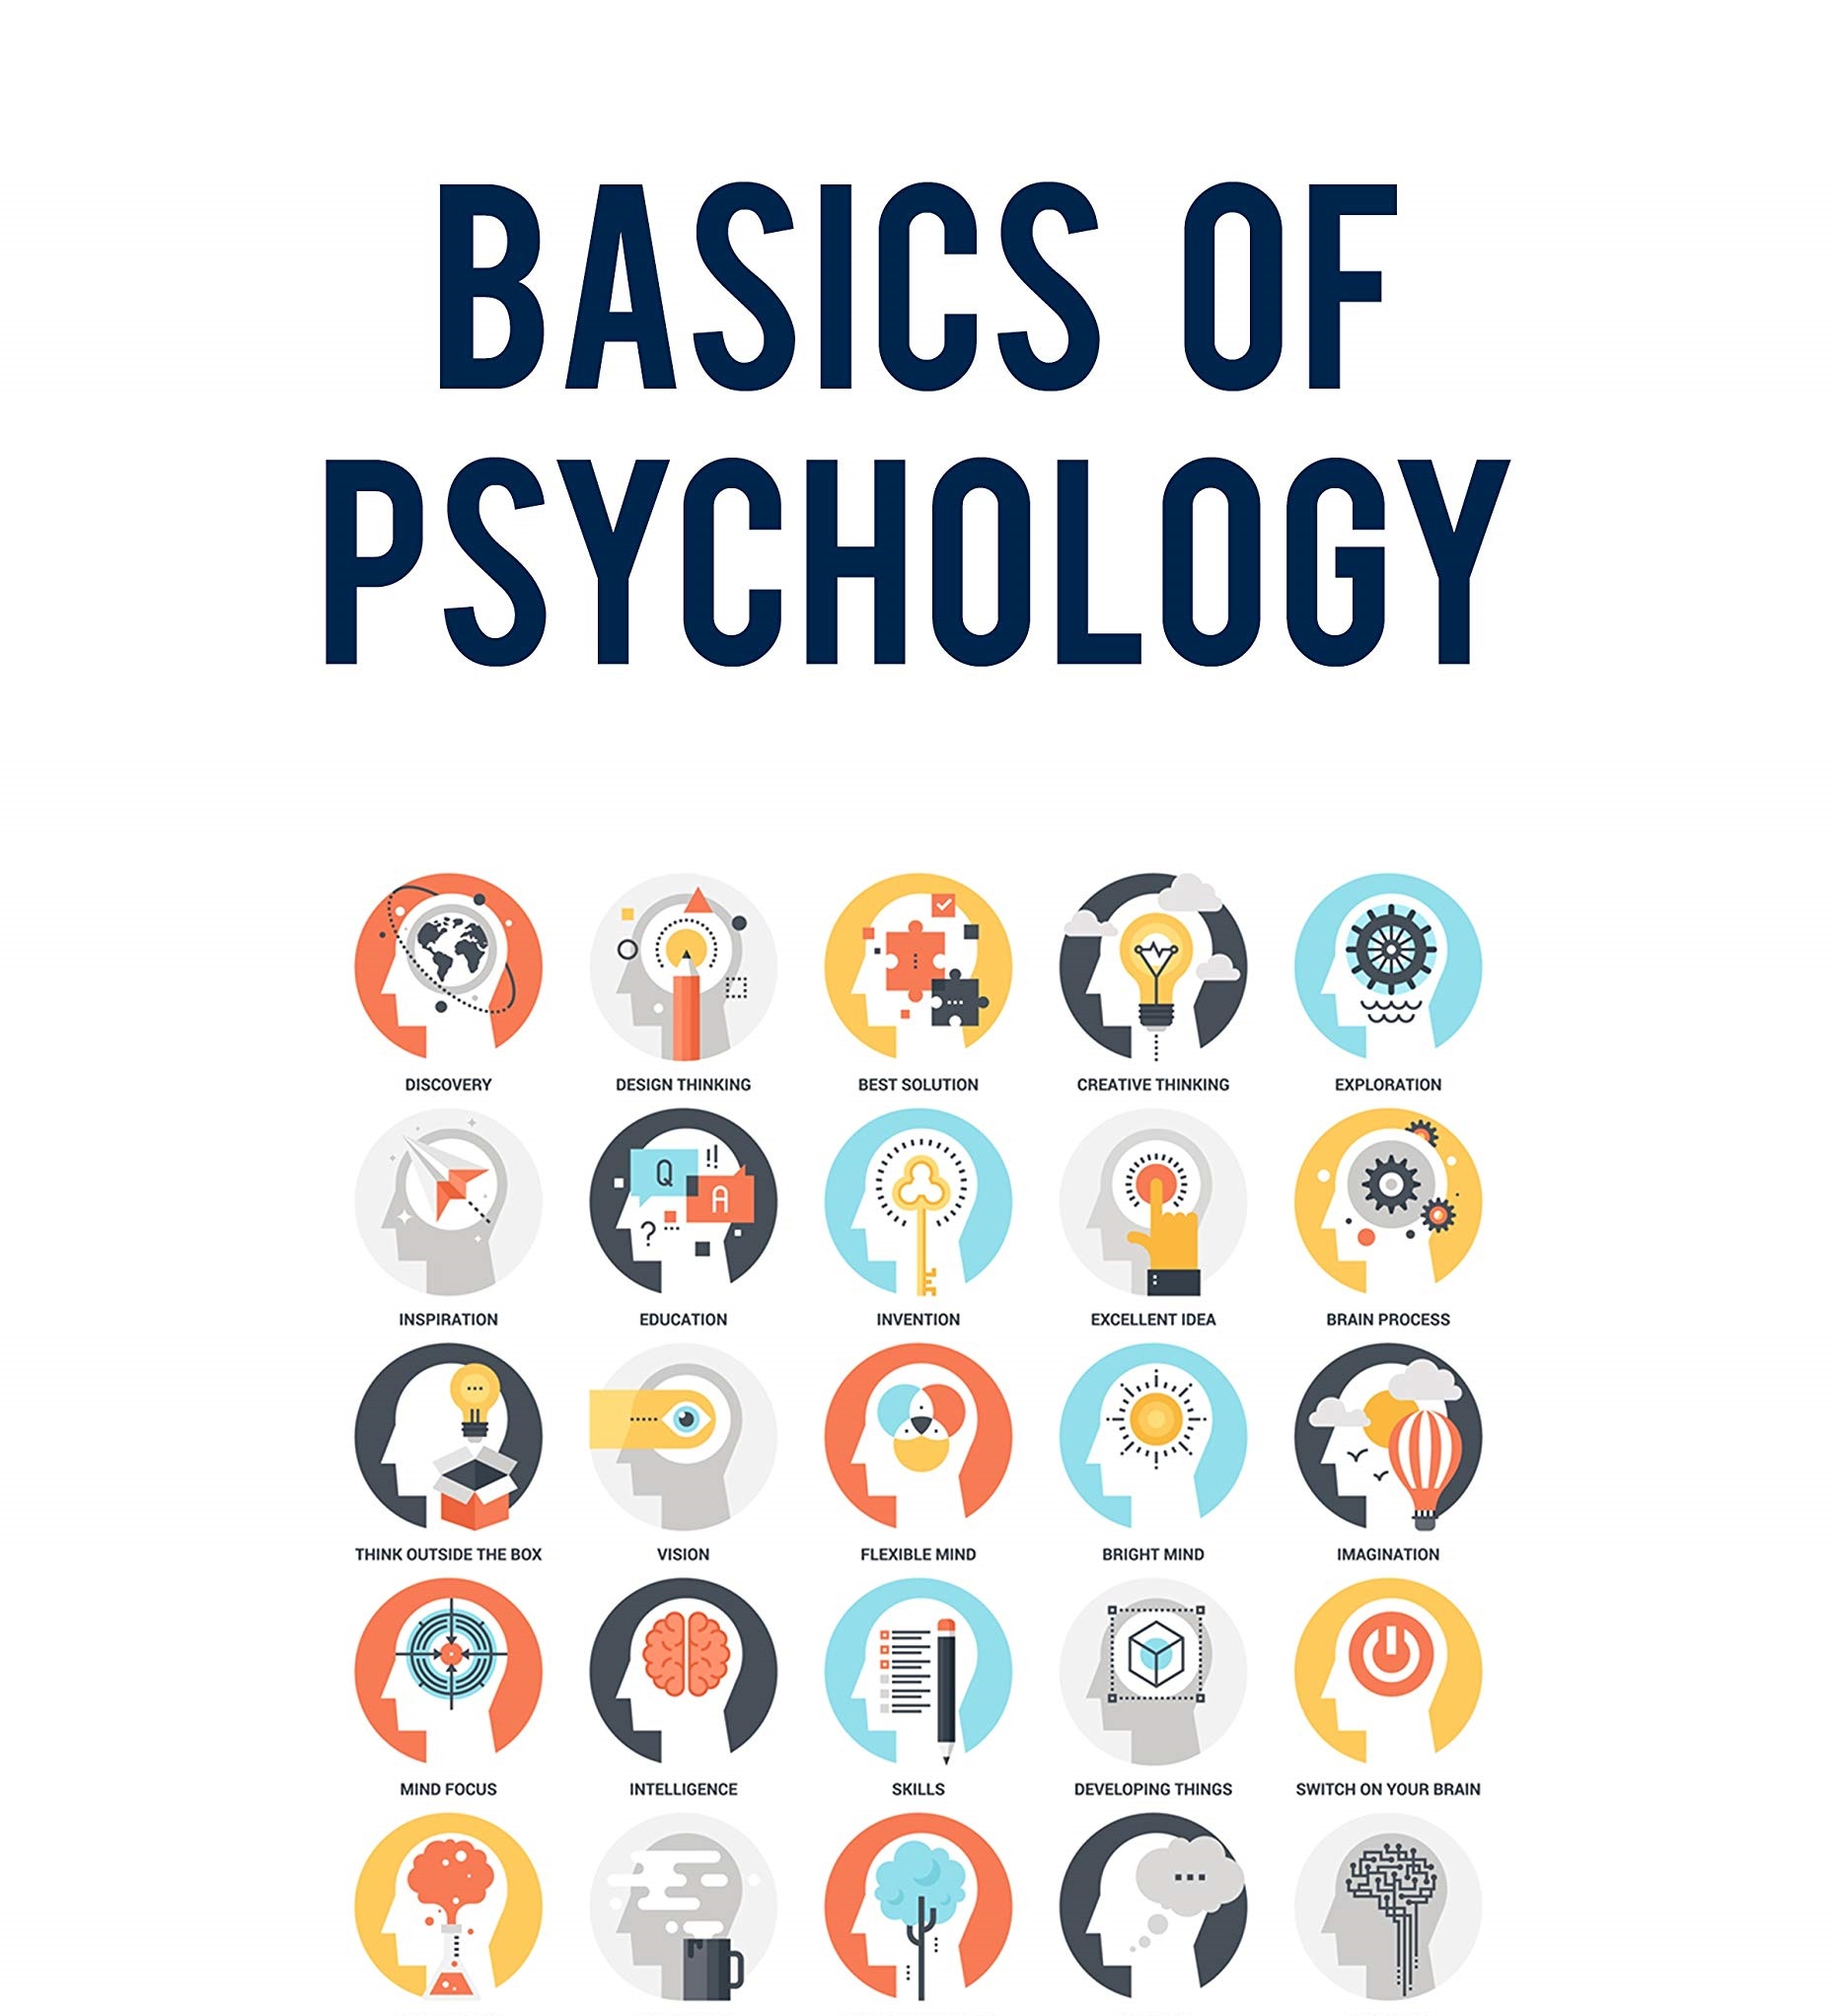  Psychological and educational products2